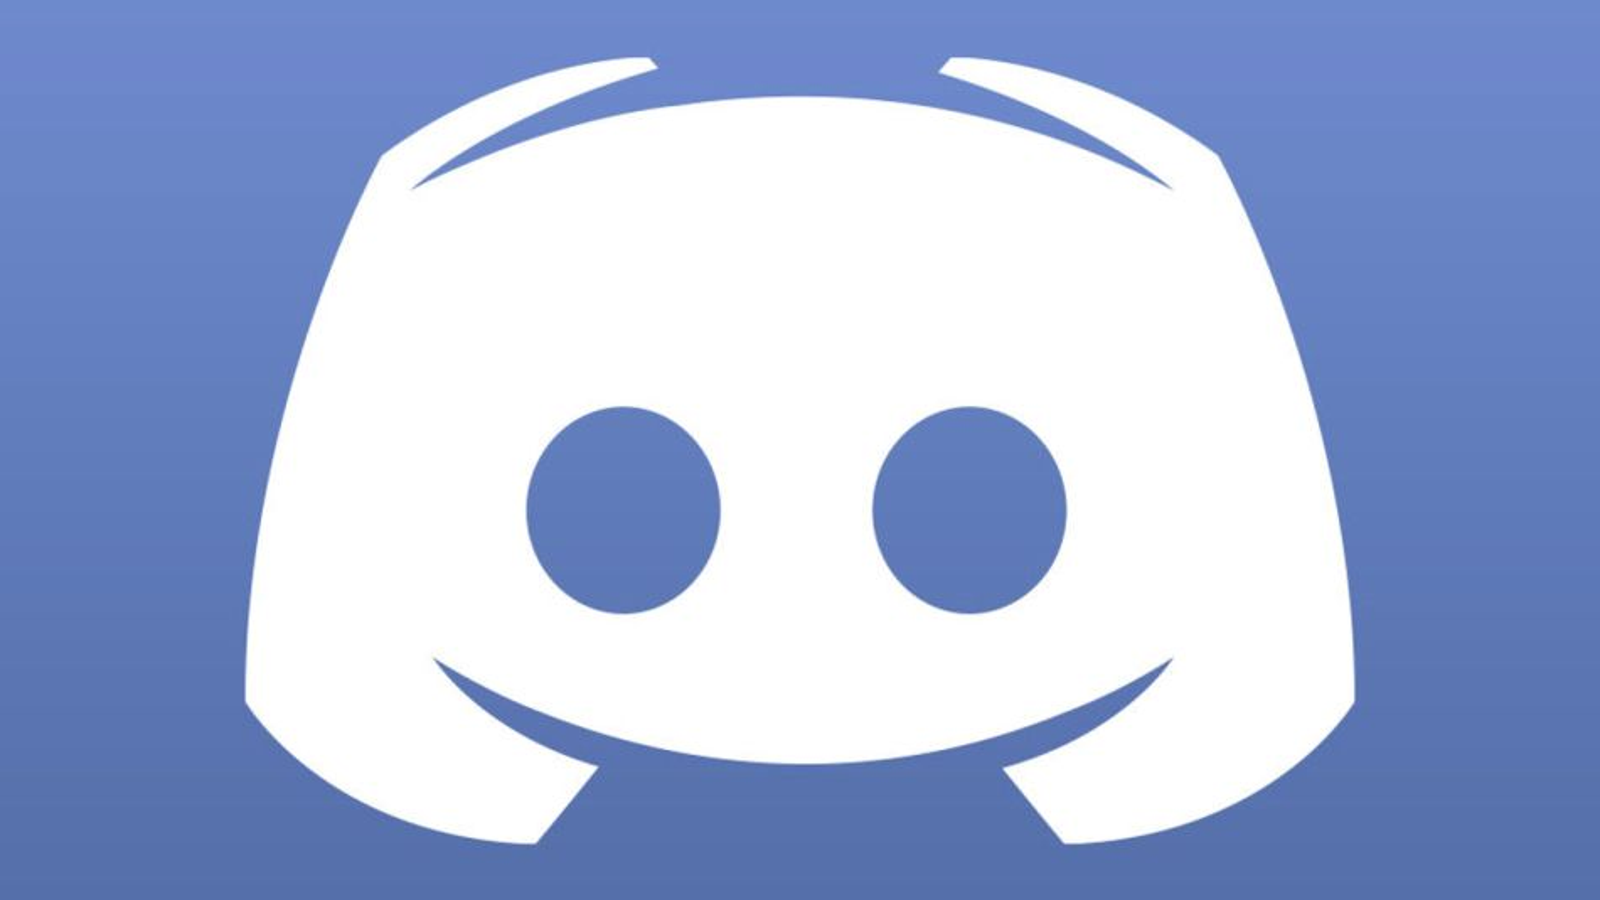 Discord Turns Up The Heat With 90/10 Revenue Split For Developers